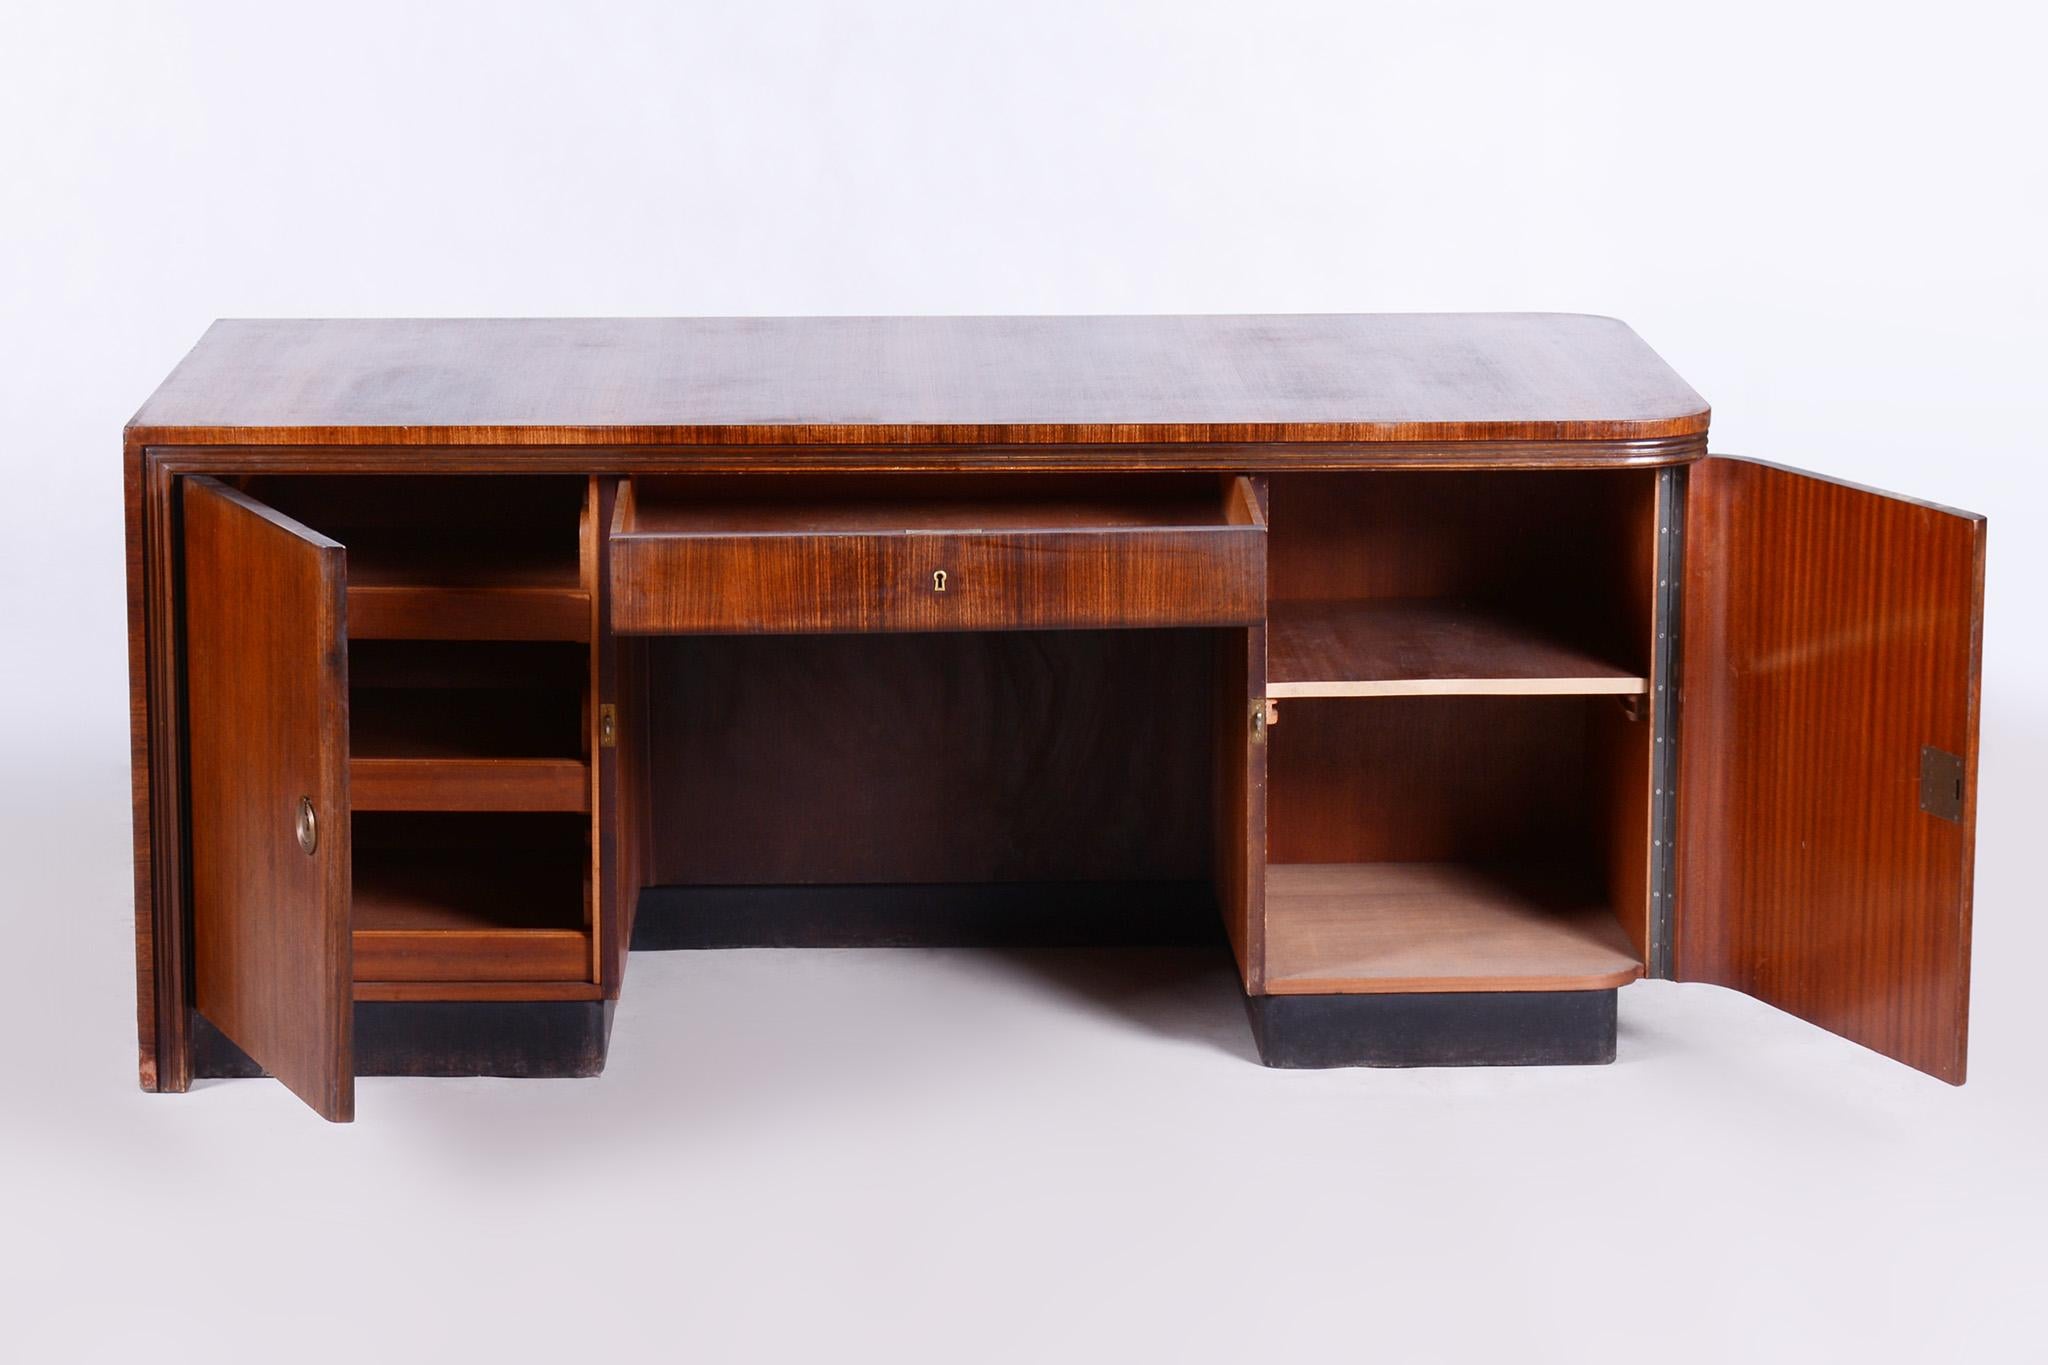 Czech Restored Art Deco Writing Desk, Germany, 1930s, Revived Polish For Sale